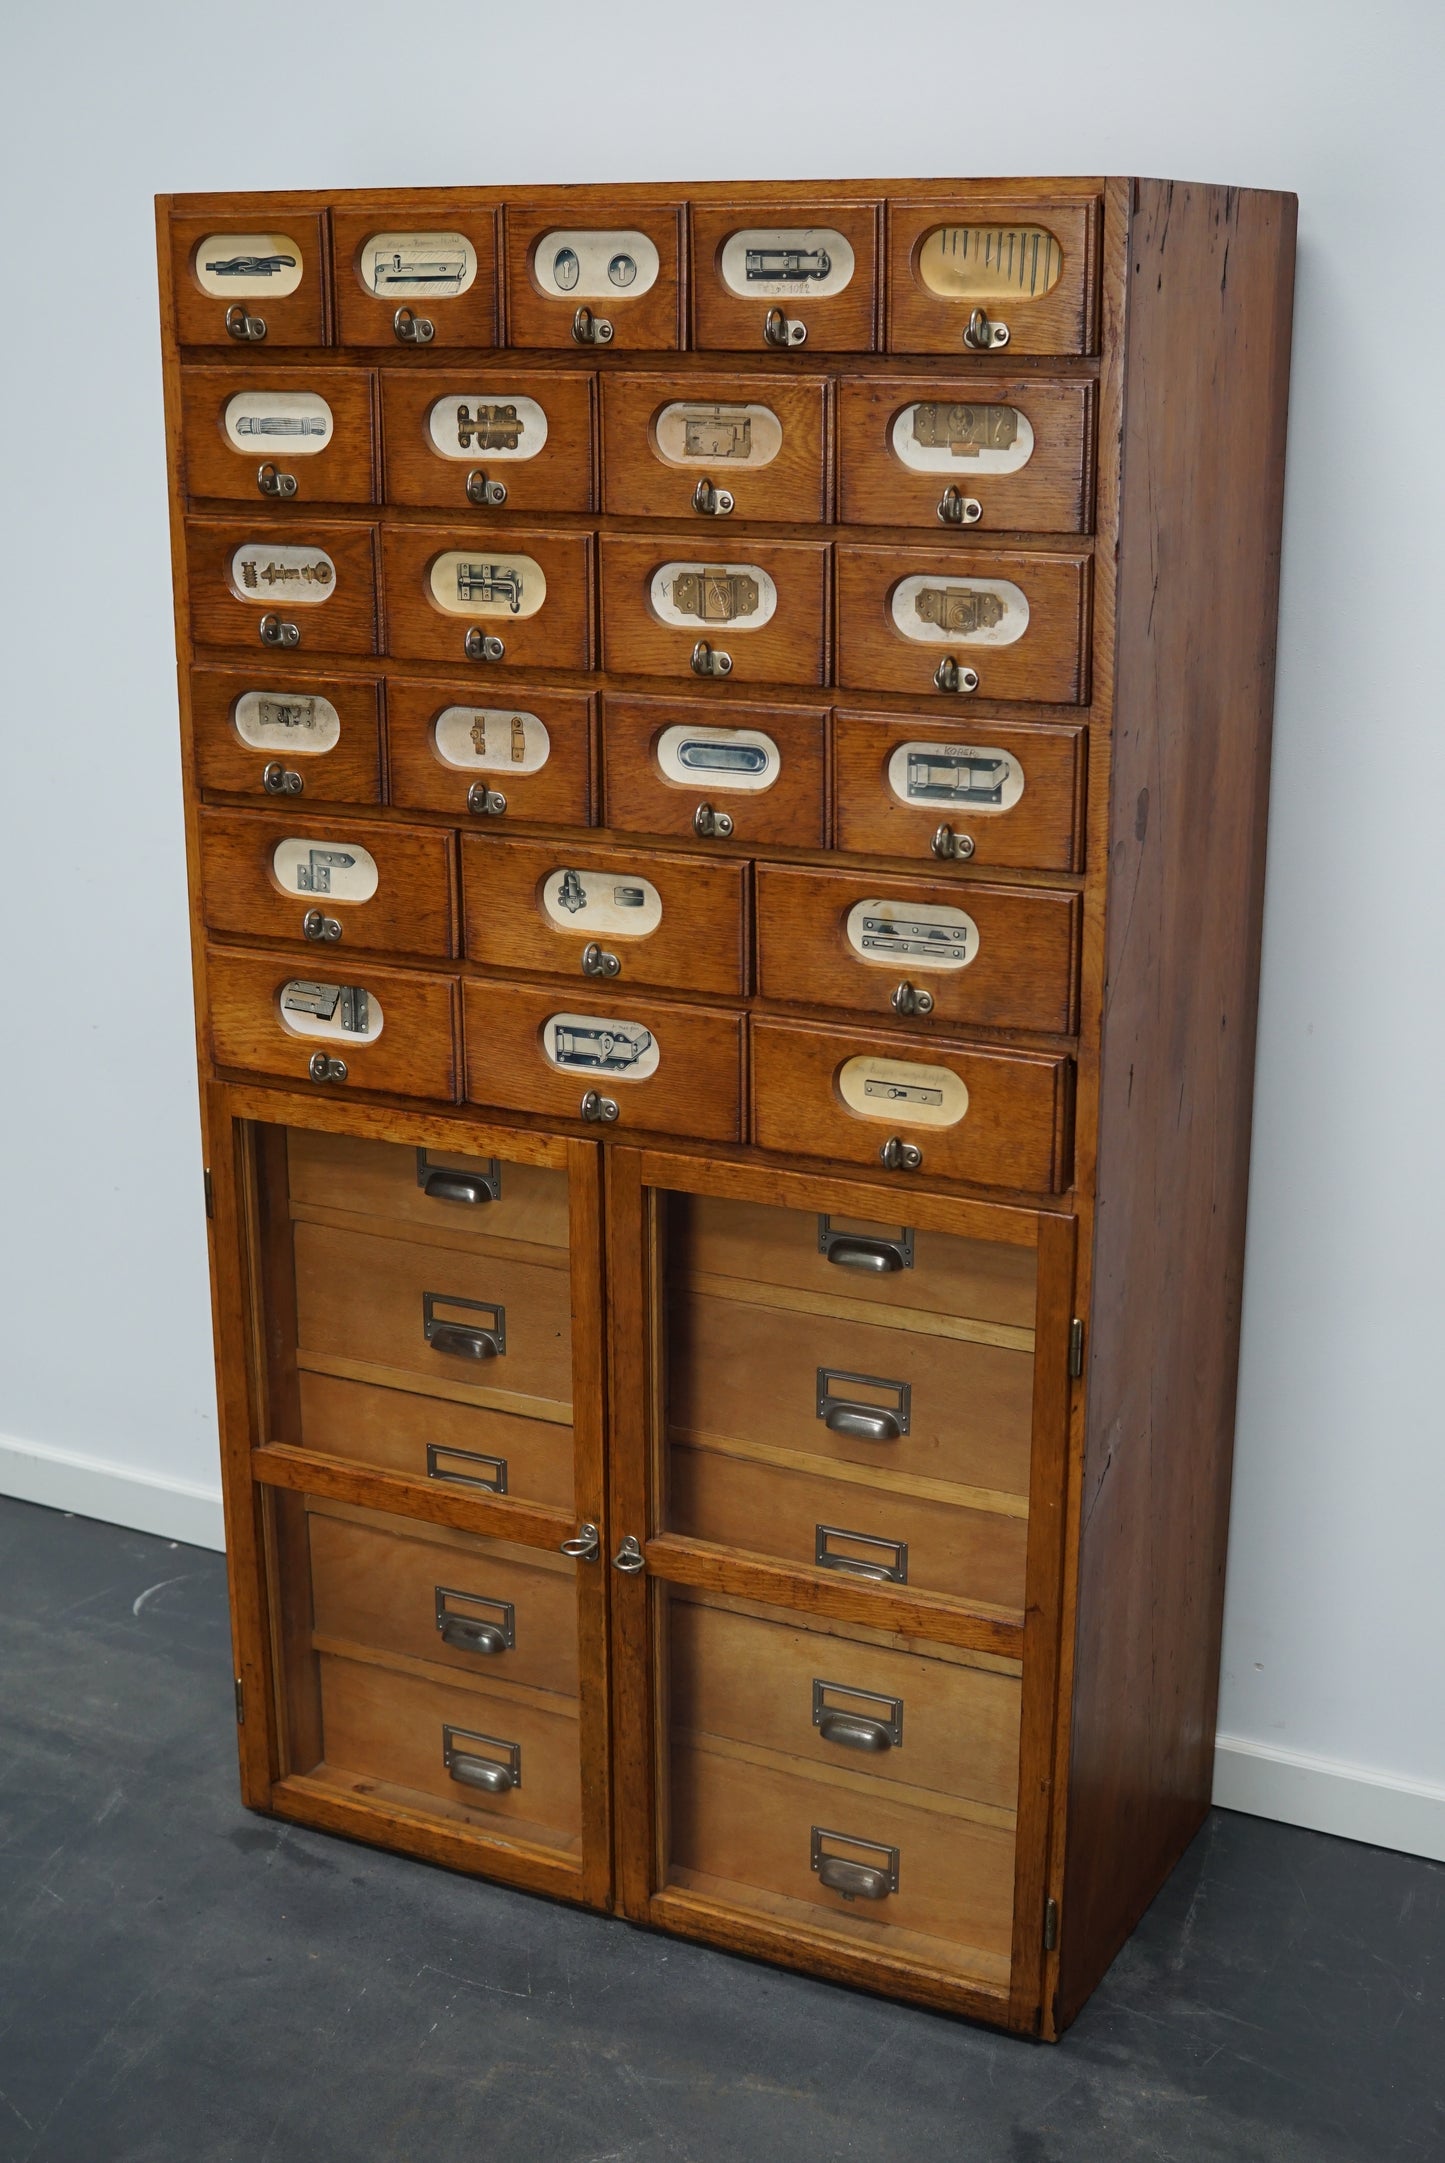 German Industrial Oak and Pine Apothecary Cabinet, Mid-20th Century